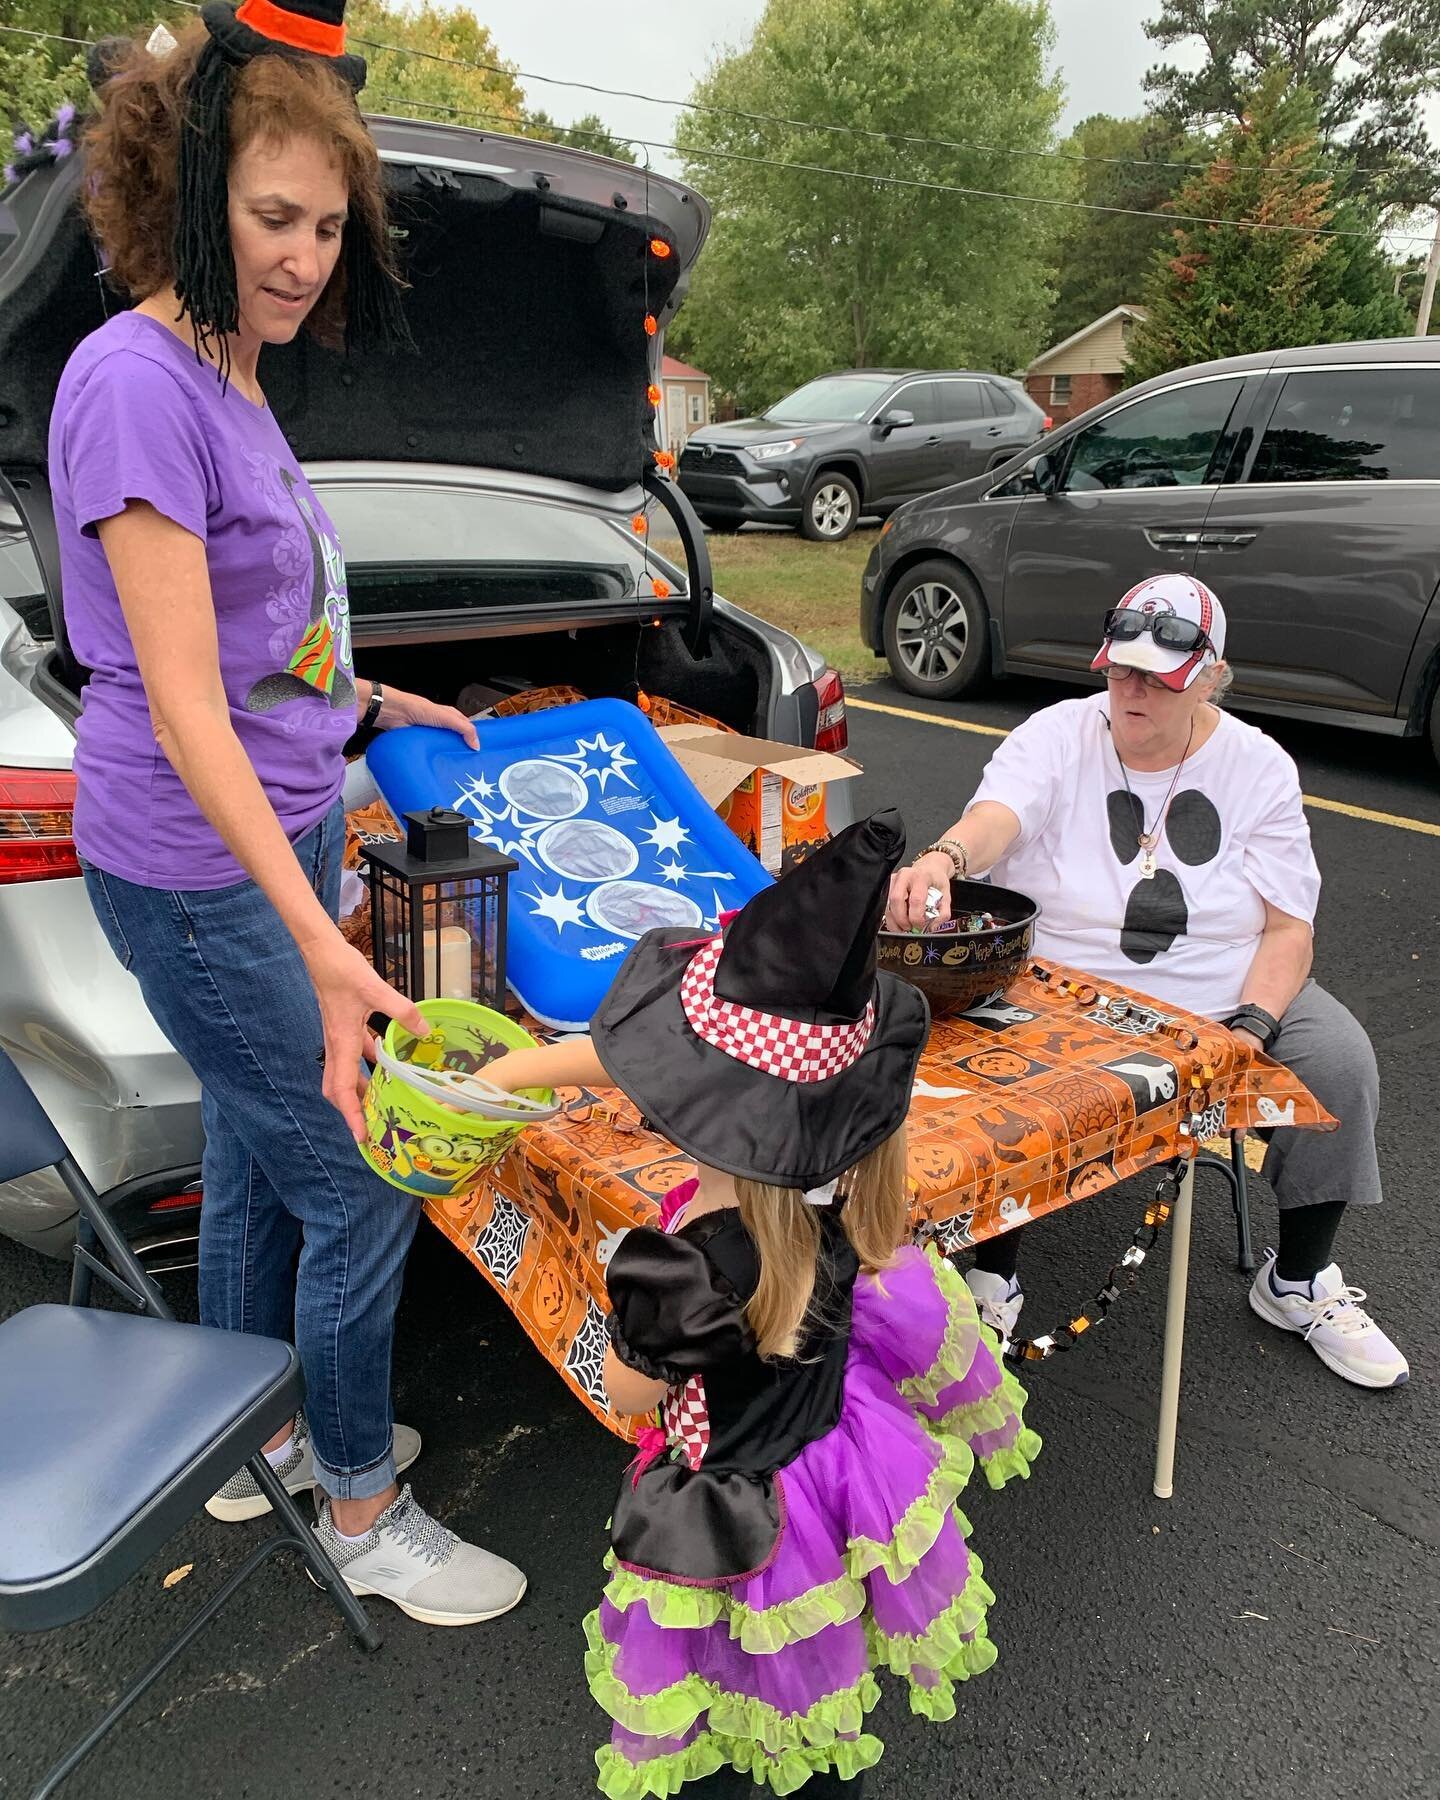 Some photos from our annual Trunk or Treat! What a great time! #trunkortreat #aldersgateumc #halloween #happyhalloween #theunitedmethodistchurch #2k19 🍭 👻 🍬 🎃 🦇 ⛪️ ✝️